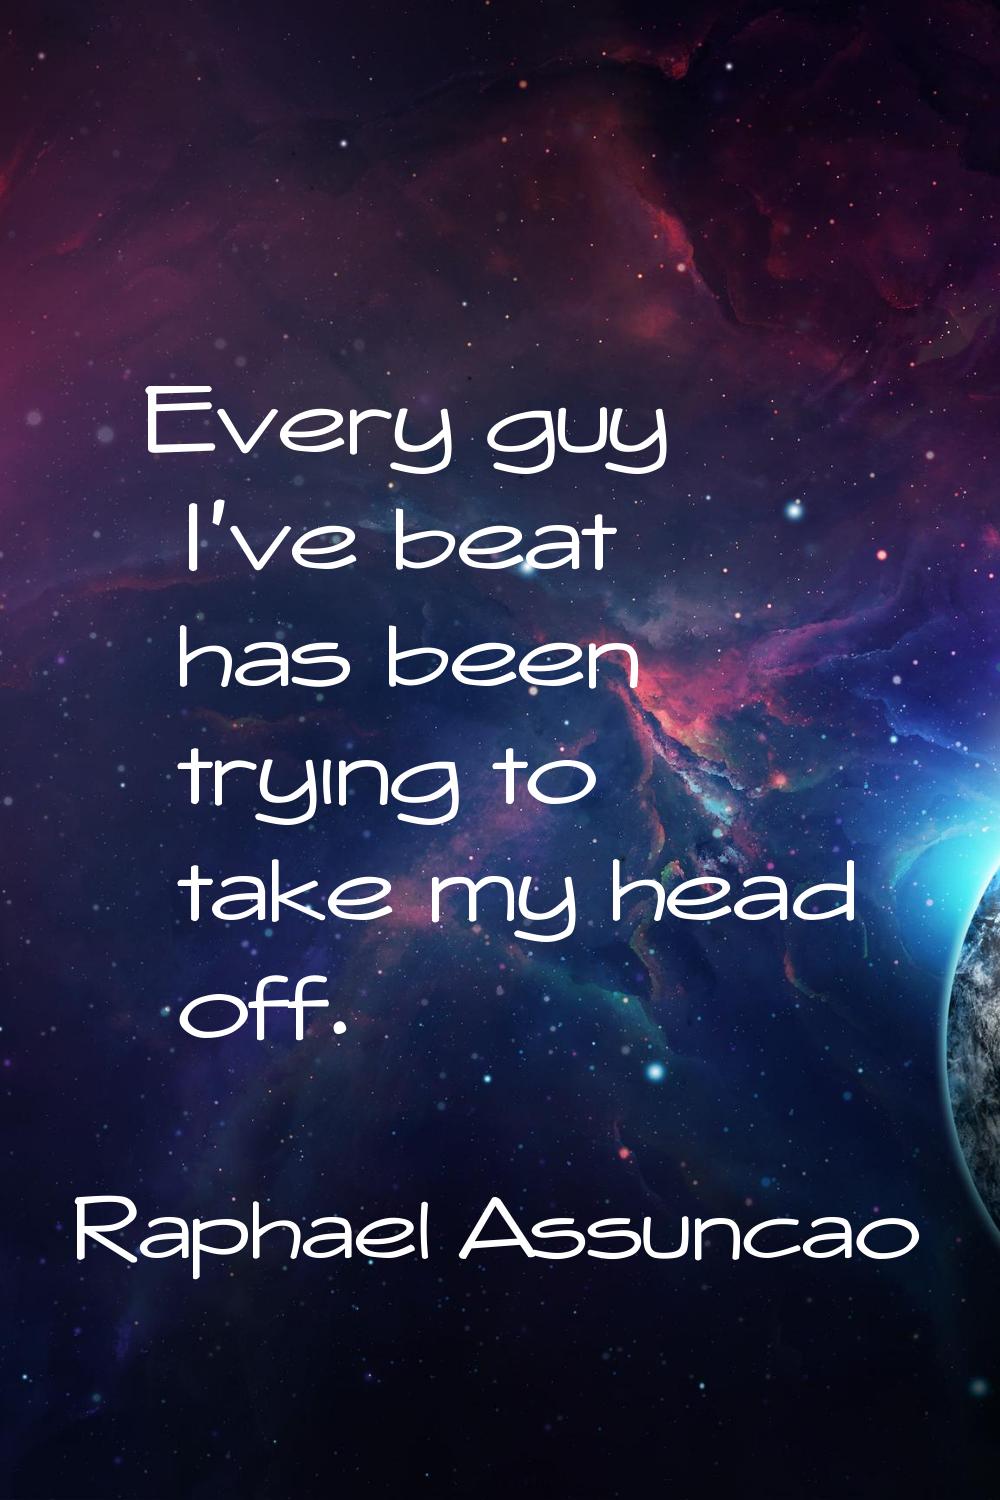 Every guy I've beat has been trying to take my head off.